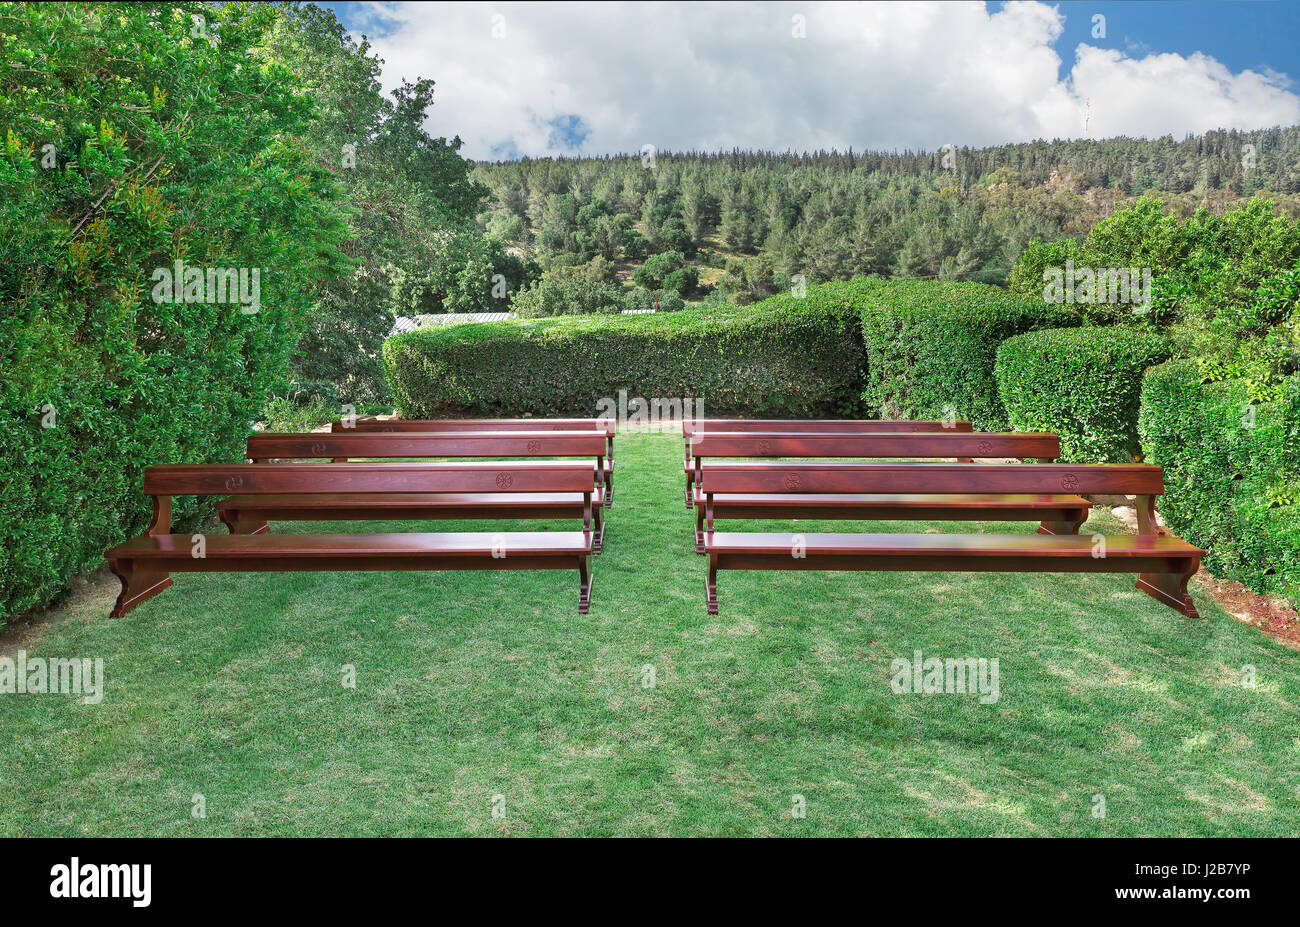 Benches with Christian symbols on the green grass for a sermon hearing Stock Photo